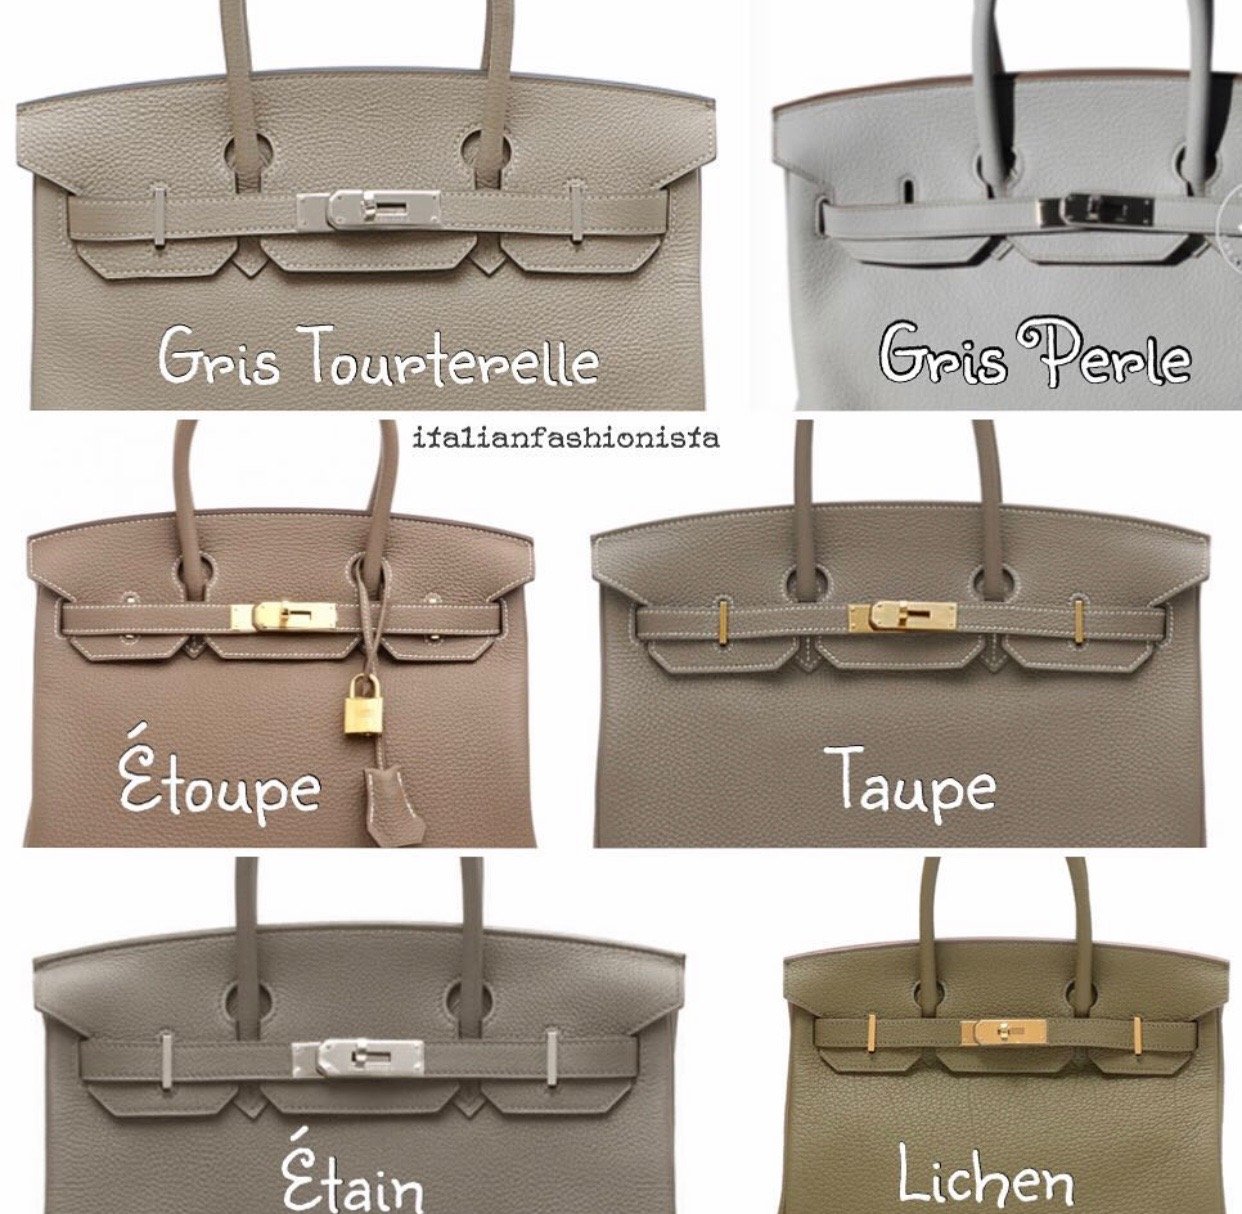 Which Hermès Gray Matches the Pantone 2021 Color of the Year